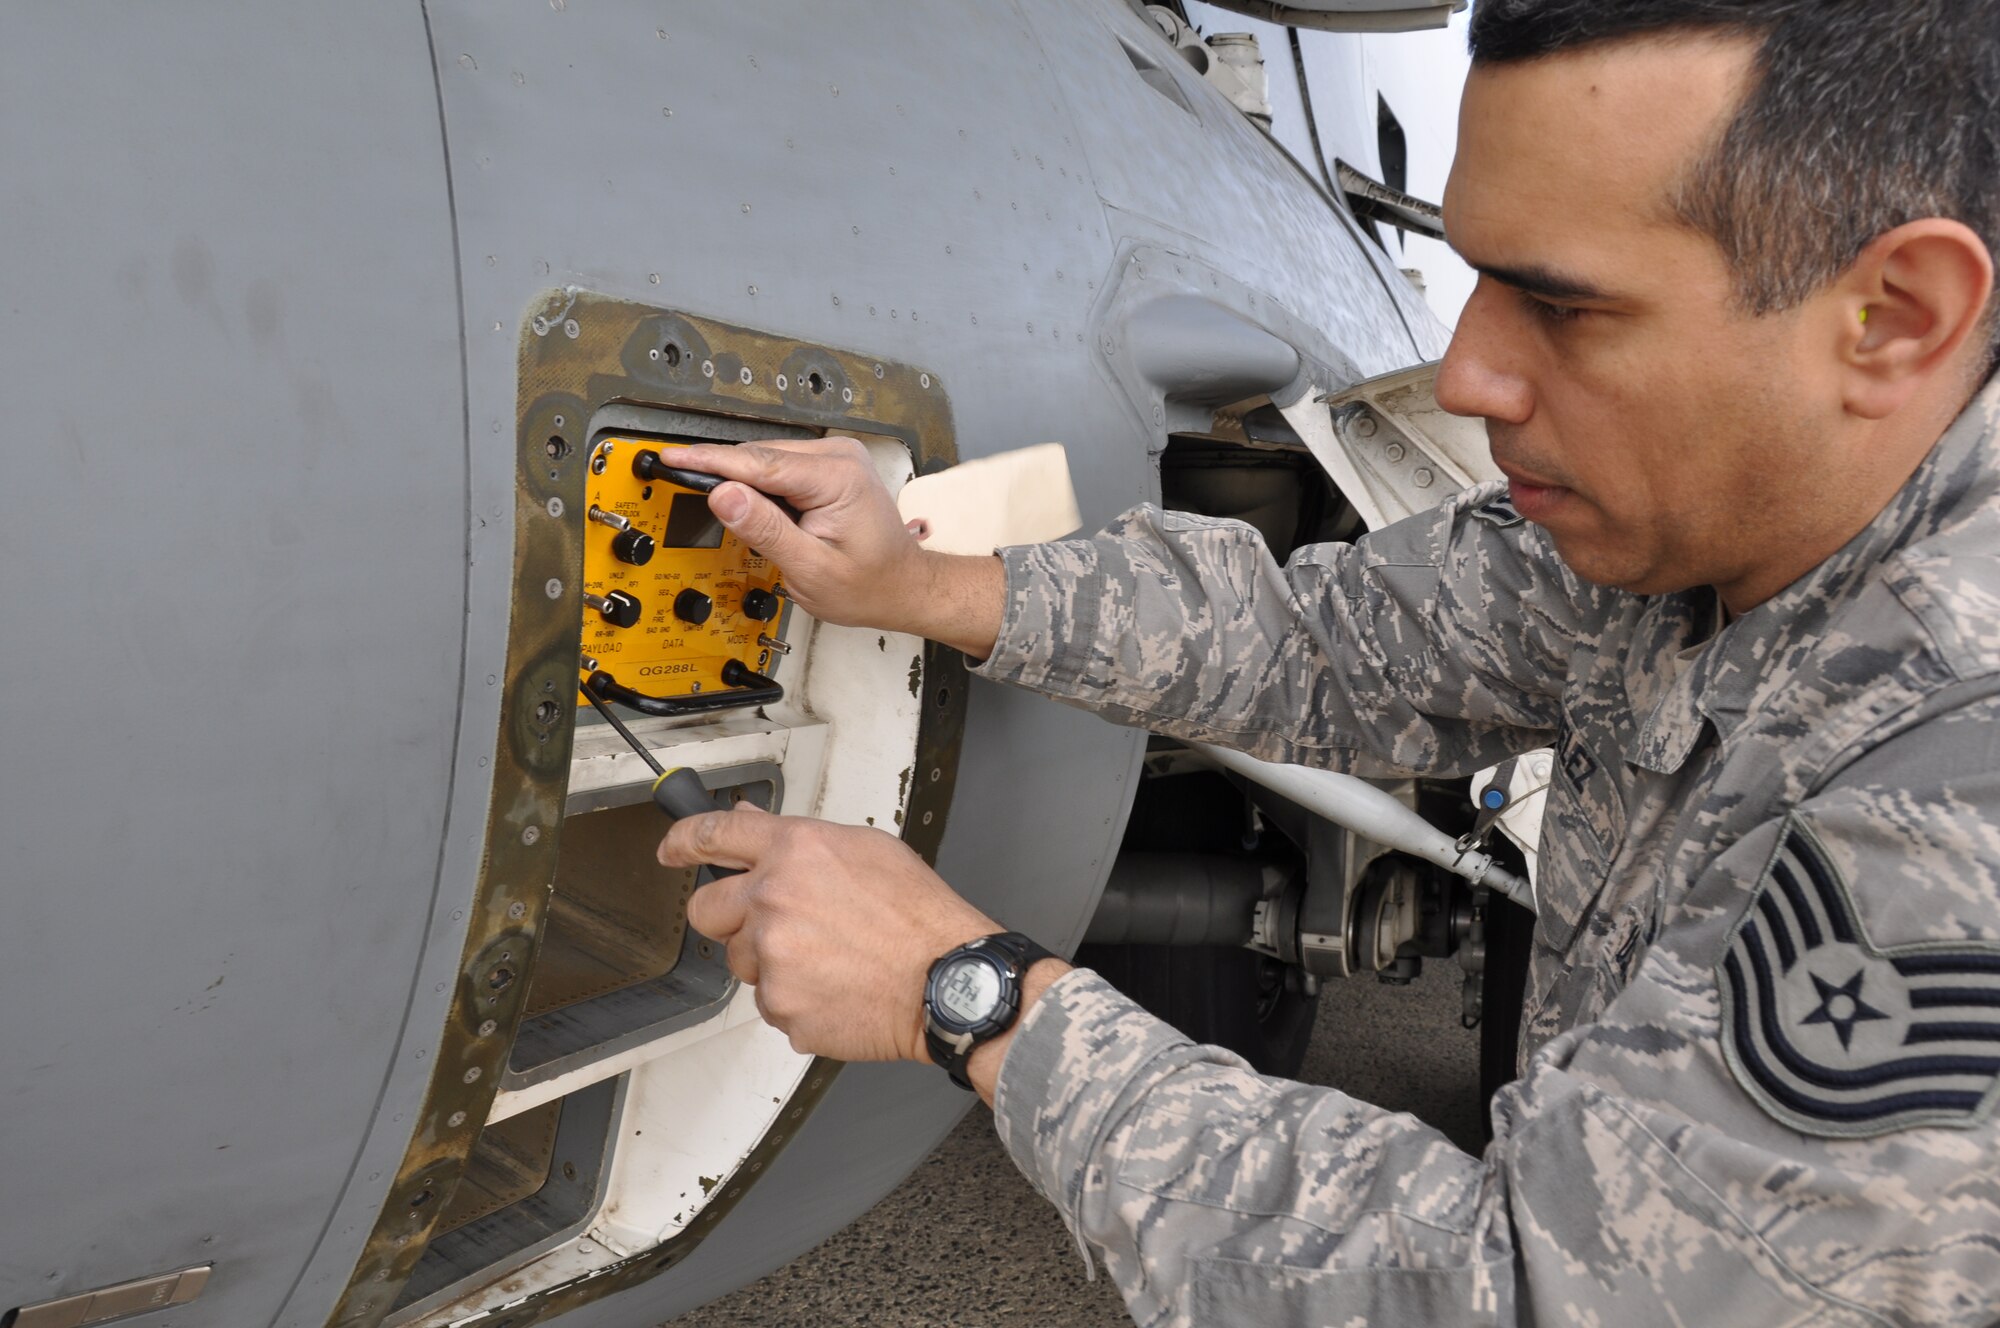 Tech Sgt. Dionisio Velez, 514th Aircraft Maintenance Squadron electronic warfare systems technician, installs an ALM288, a defensive system tester, to check countermeasure dispense systems on a C-17 Globemaster III aircraft here April 5 (U.S. Air Force photo Senior Airman Chelsea Smith).